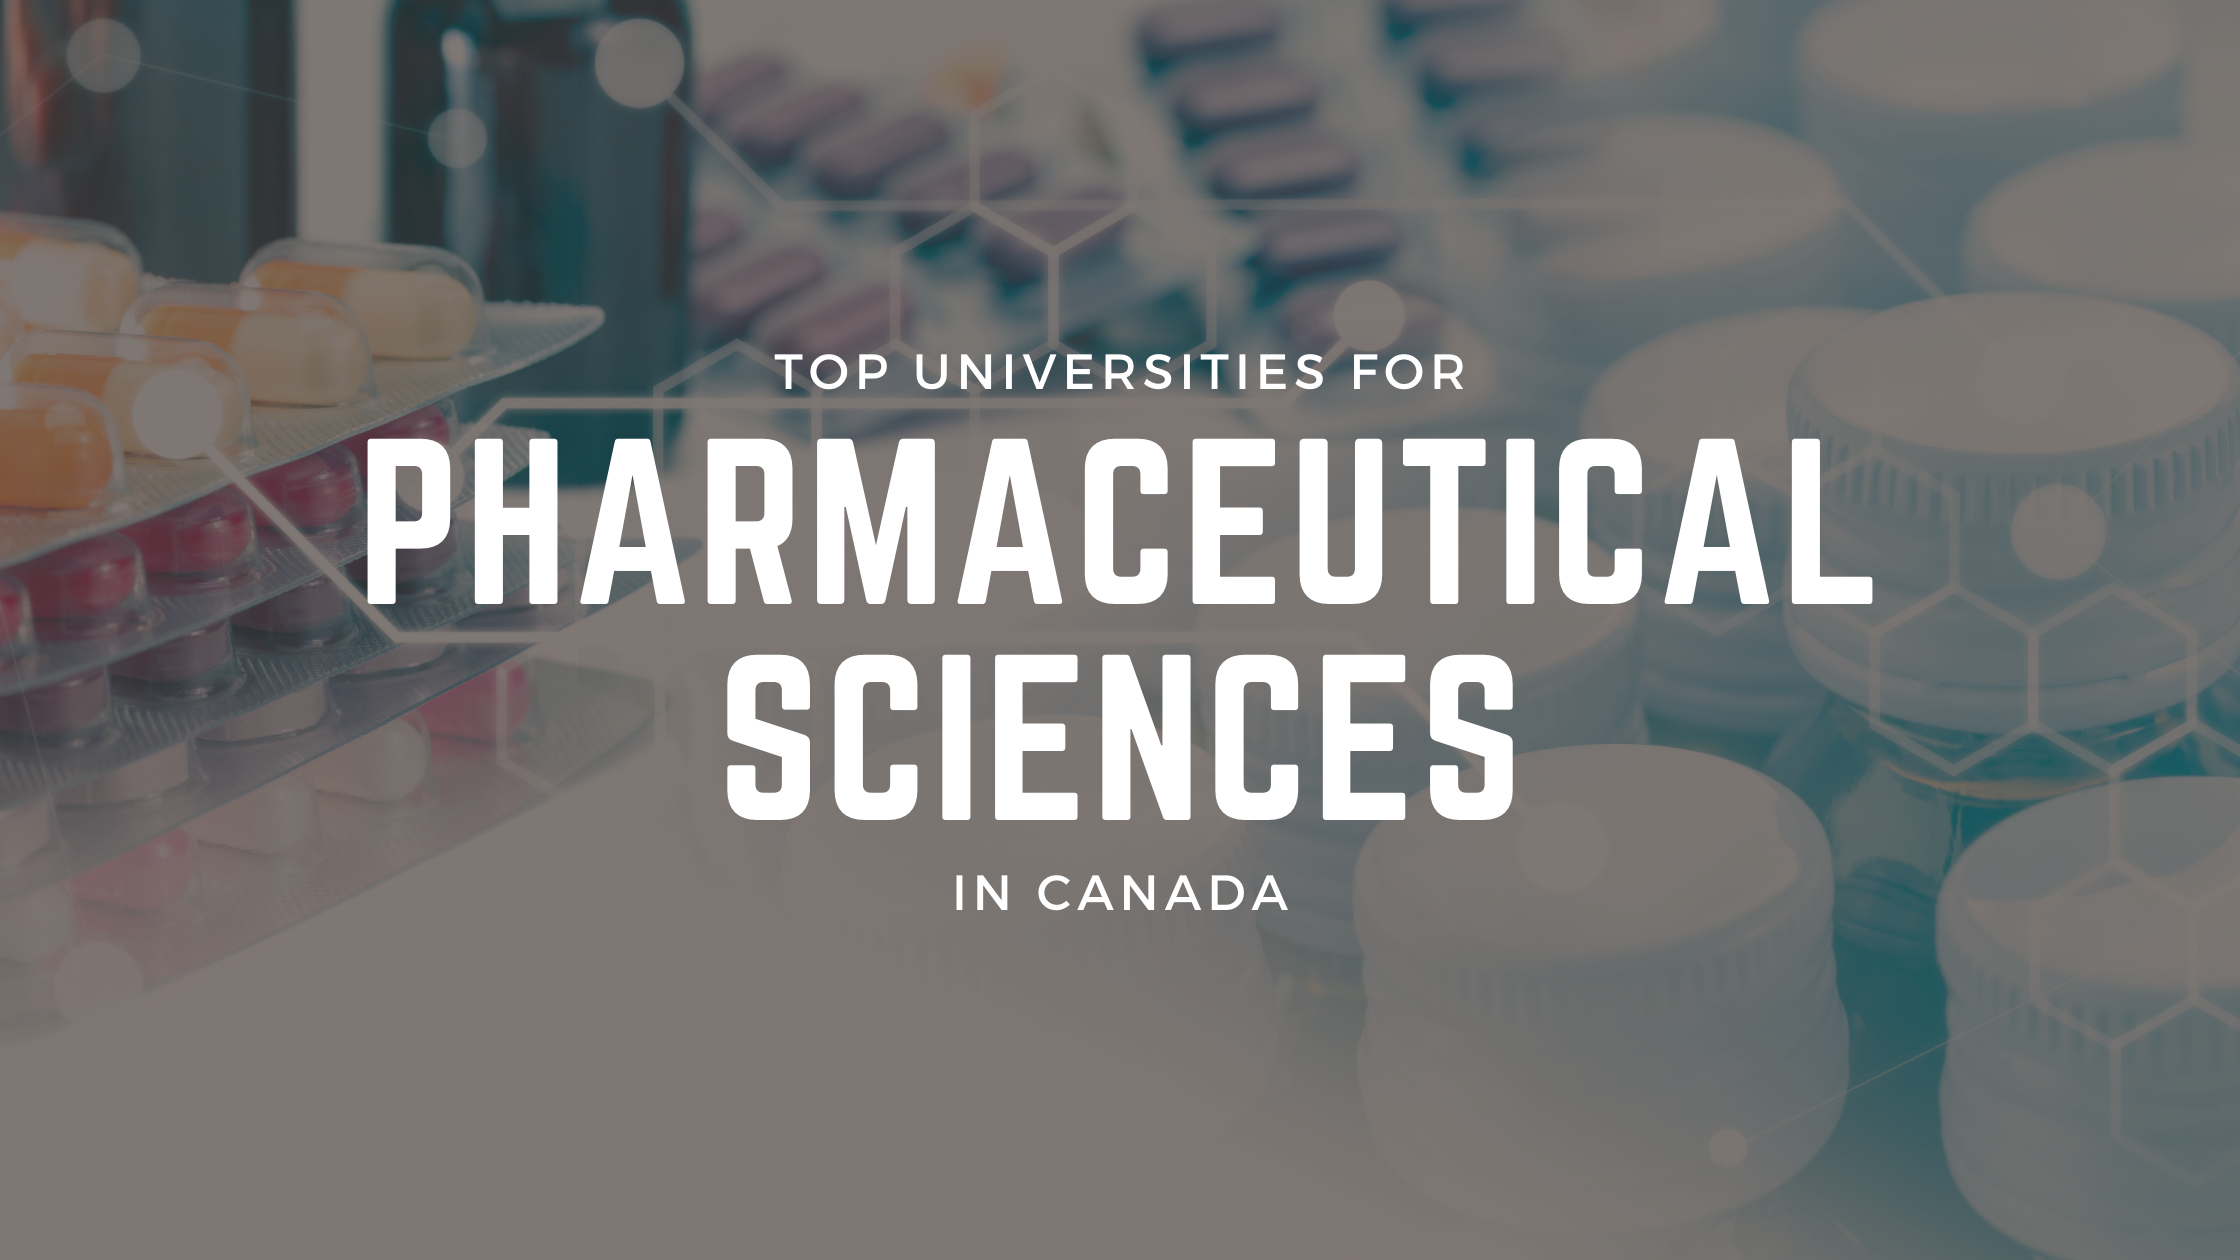 Top universities for Pharmaceutical Sciences in Canada